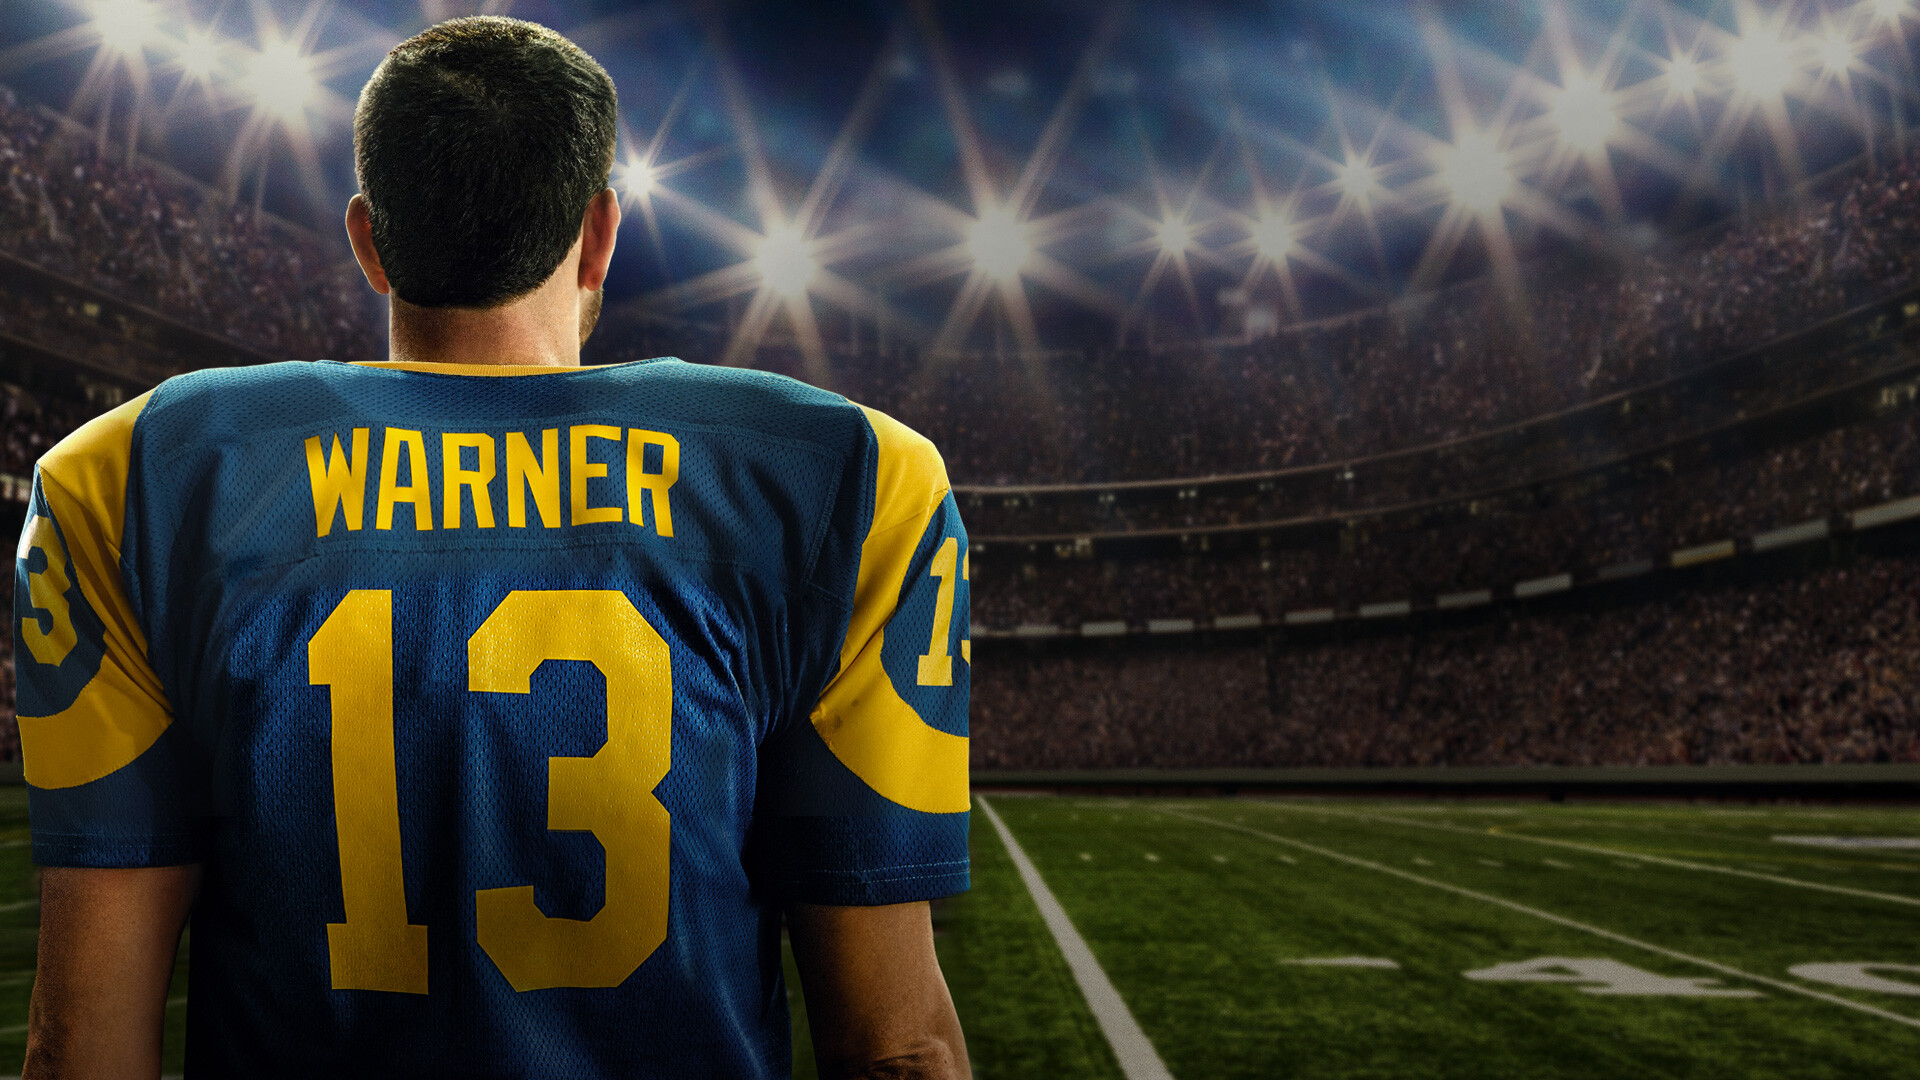 American Underdog: In this inspirational true story, Kurt Warner goes from stocking shelves at a supermarket to become a legendary two-time NFL MVP, Super Bowl MVP, and Hall of Fame quarterback. 1920x1080 Full HD Wallpaper.